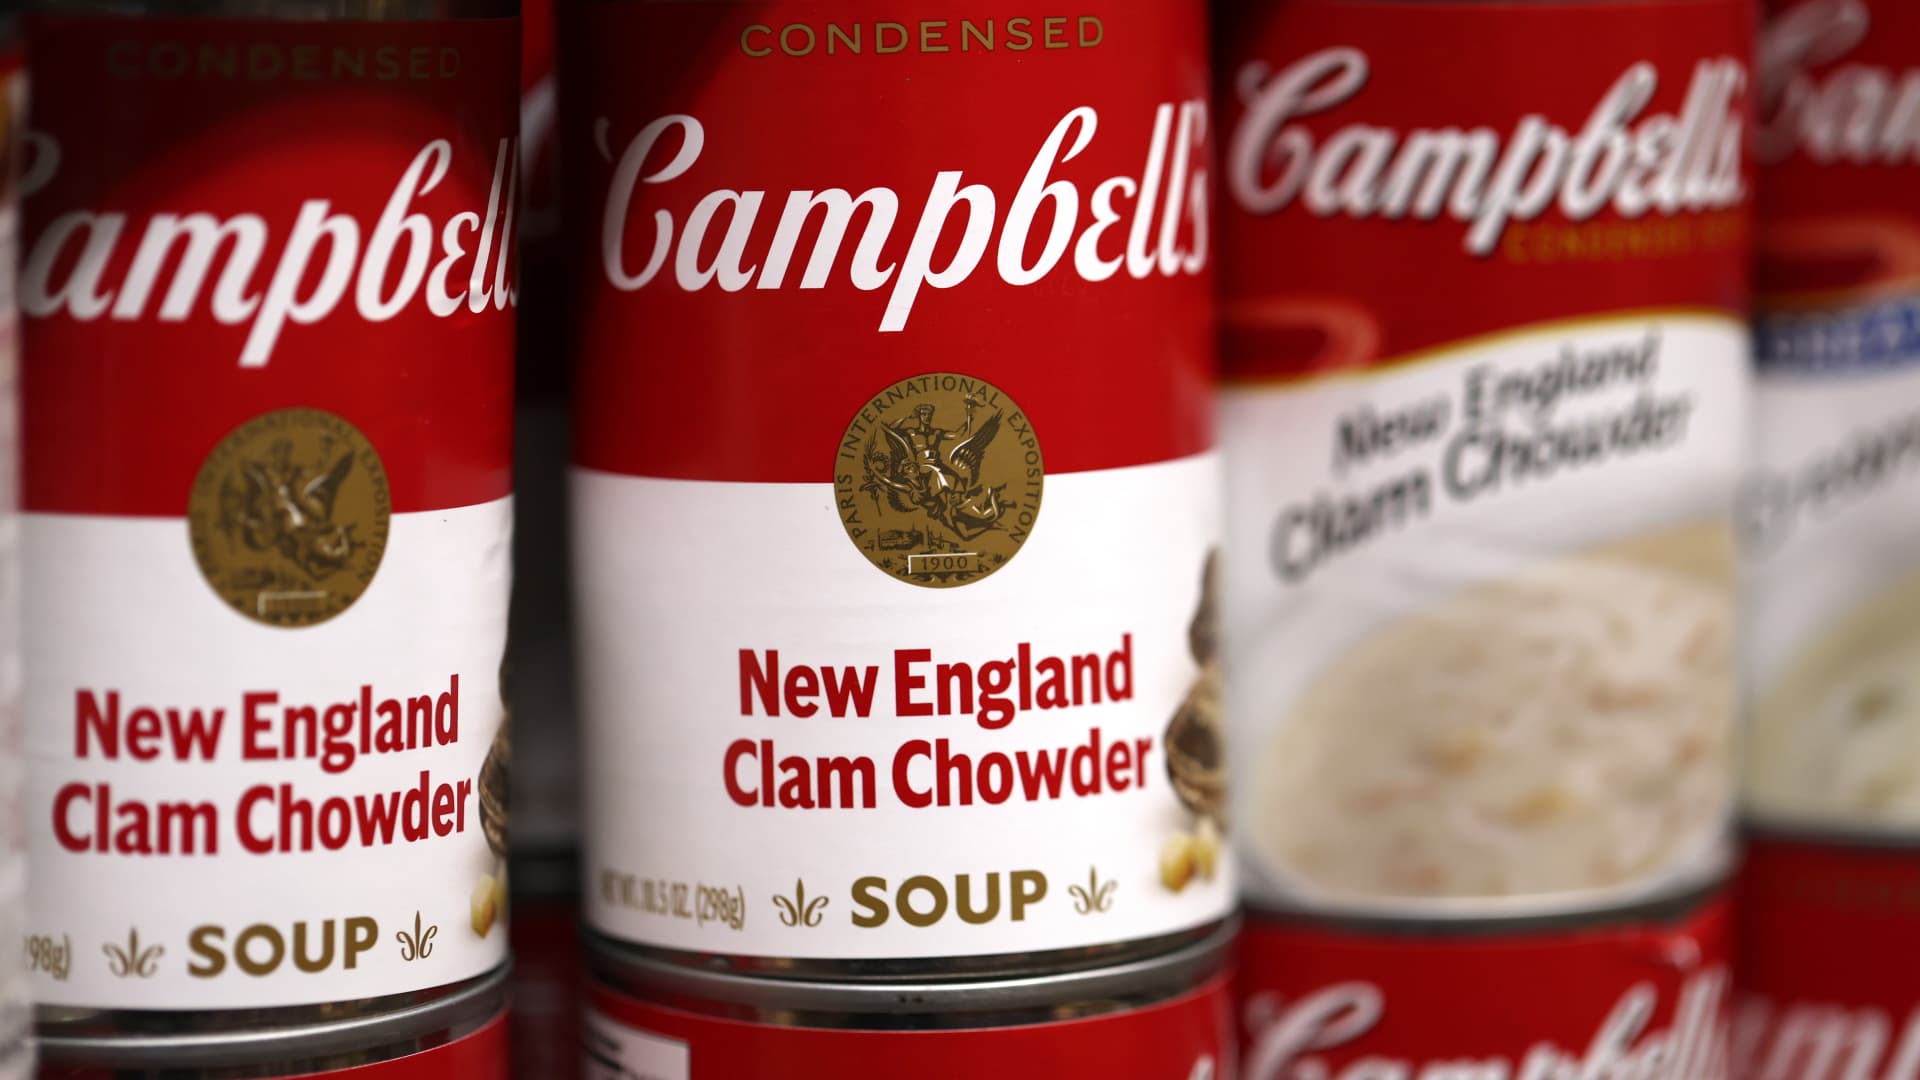 Stocks making the biggest moves premarket: Campbell Soup, Moderna, Western Digital and others